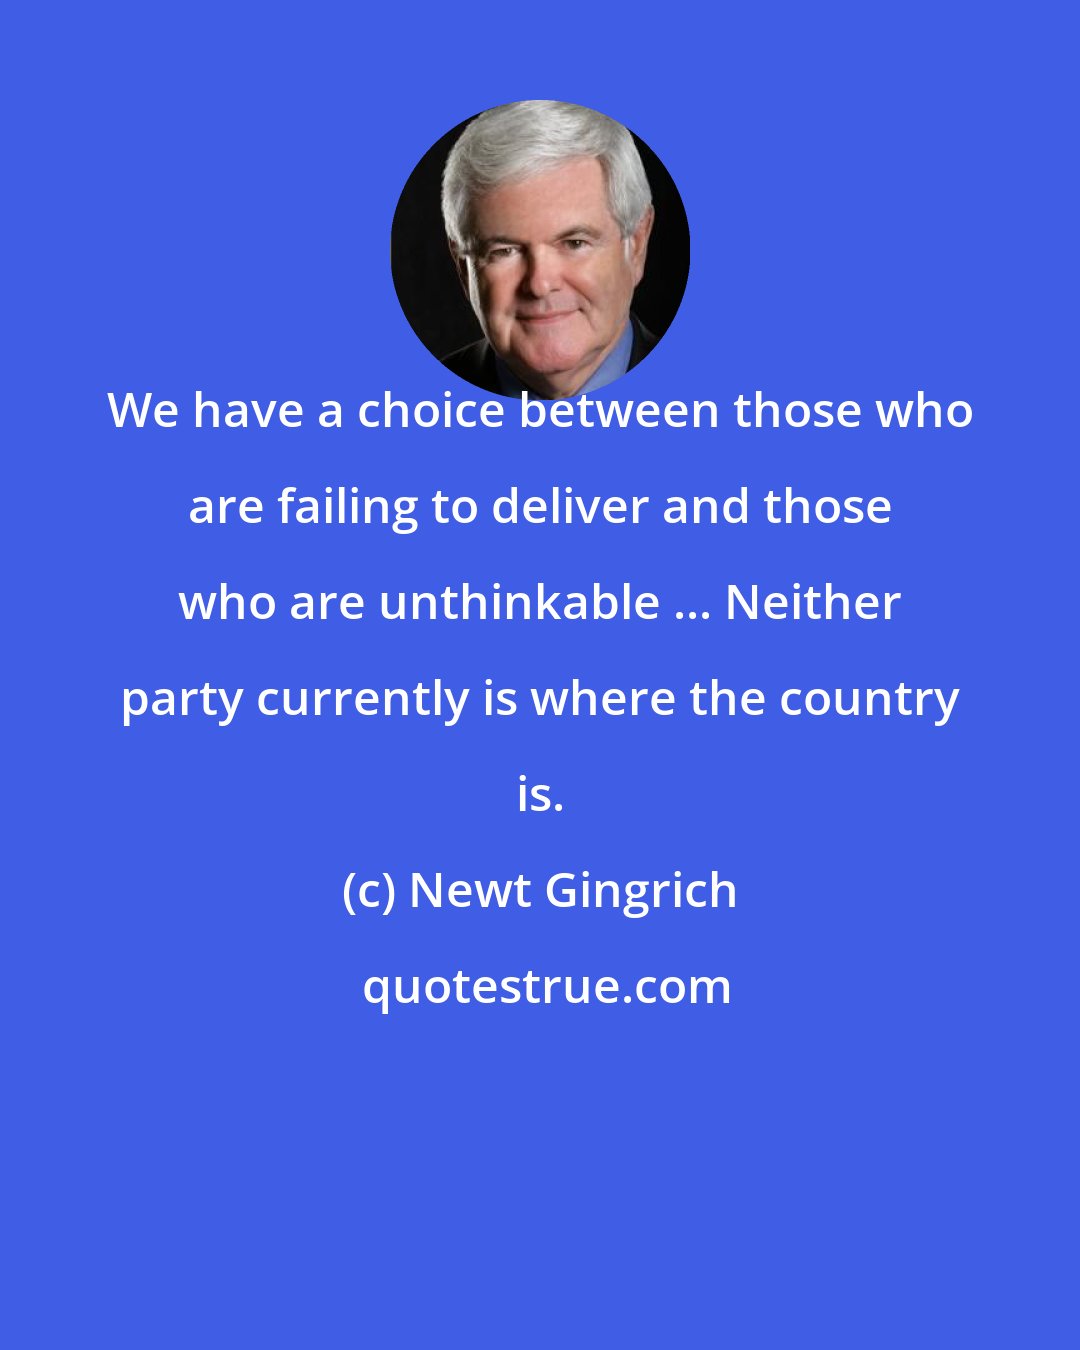 Newt Gingrich: We have a choice between those who are failing to deliver and those who are unthinkable ... Neither party currently is where the country is.